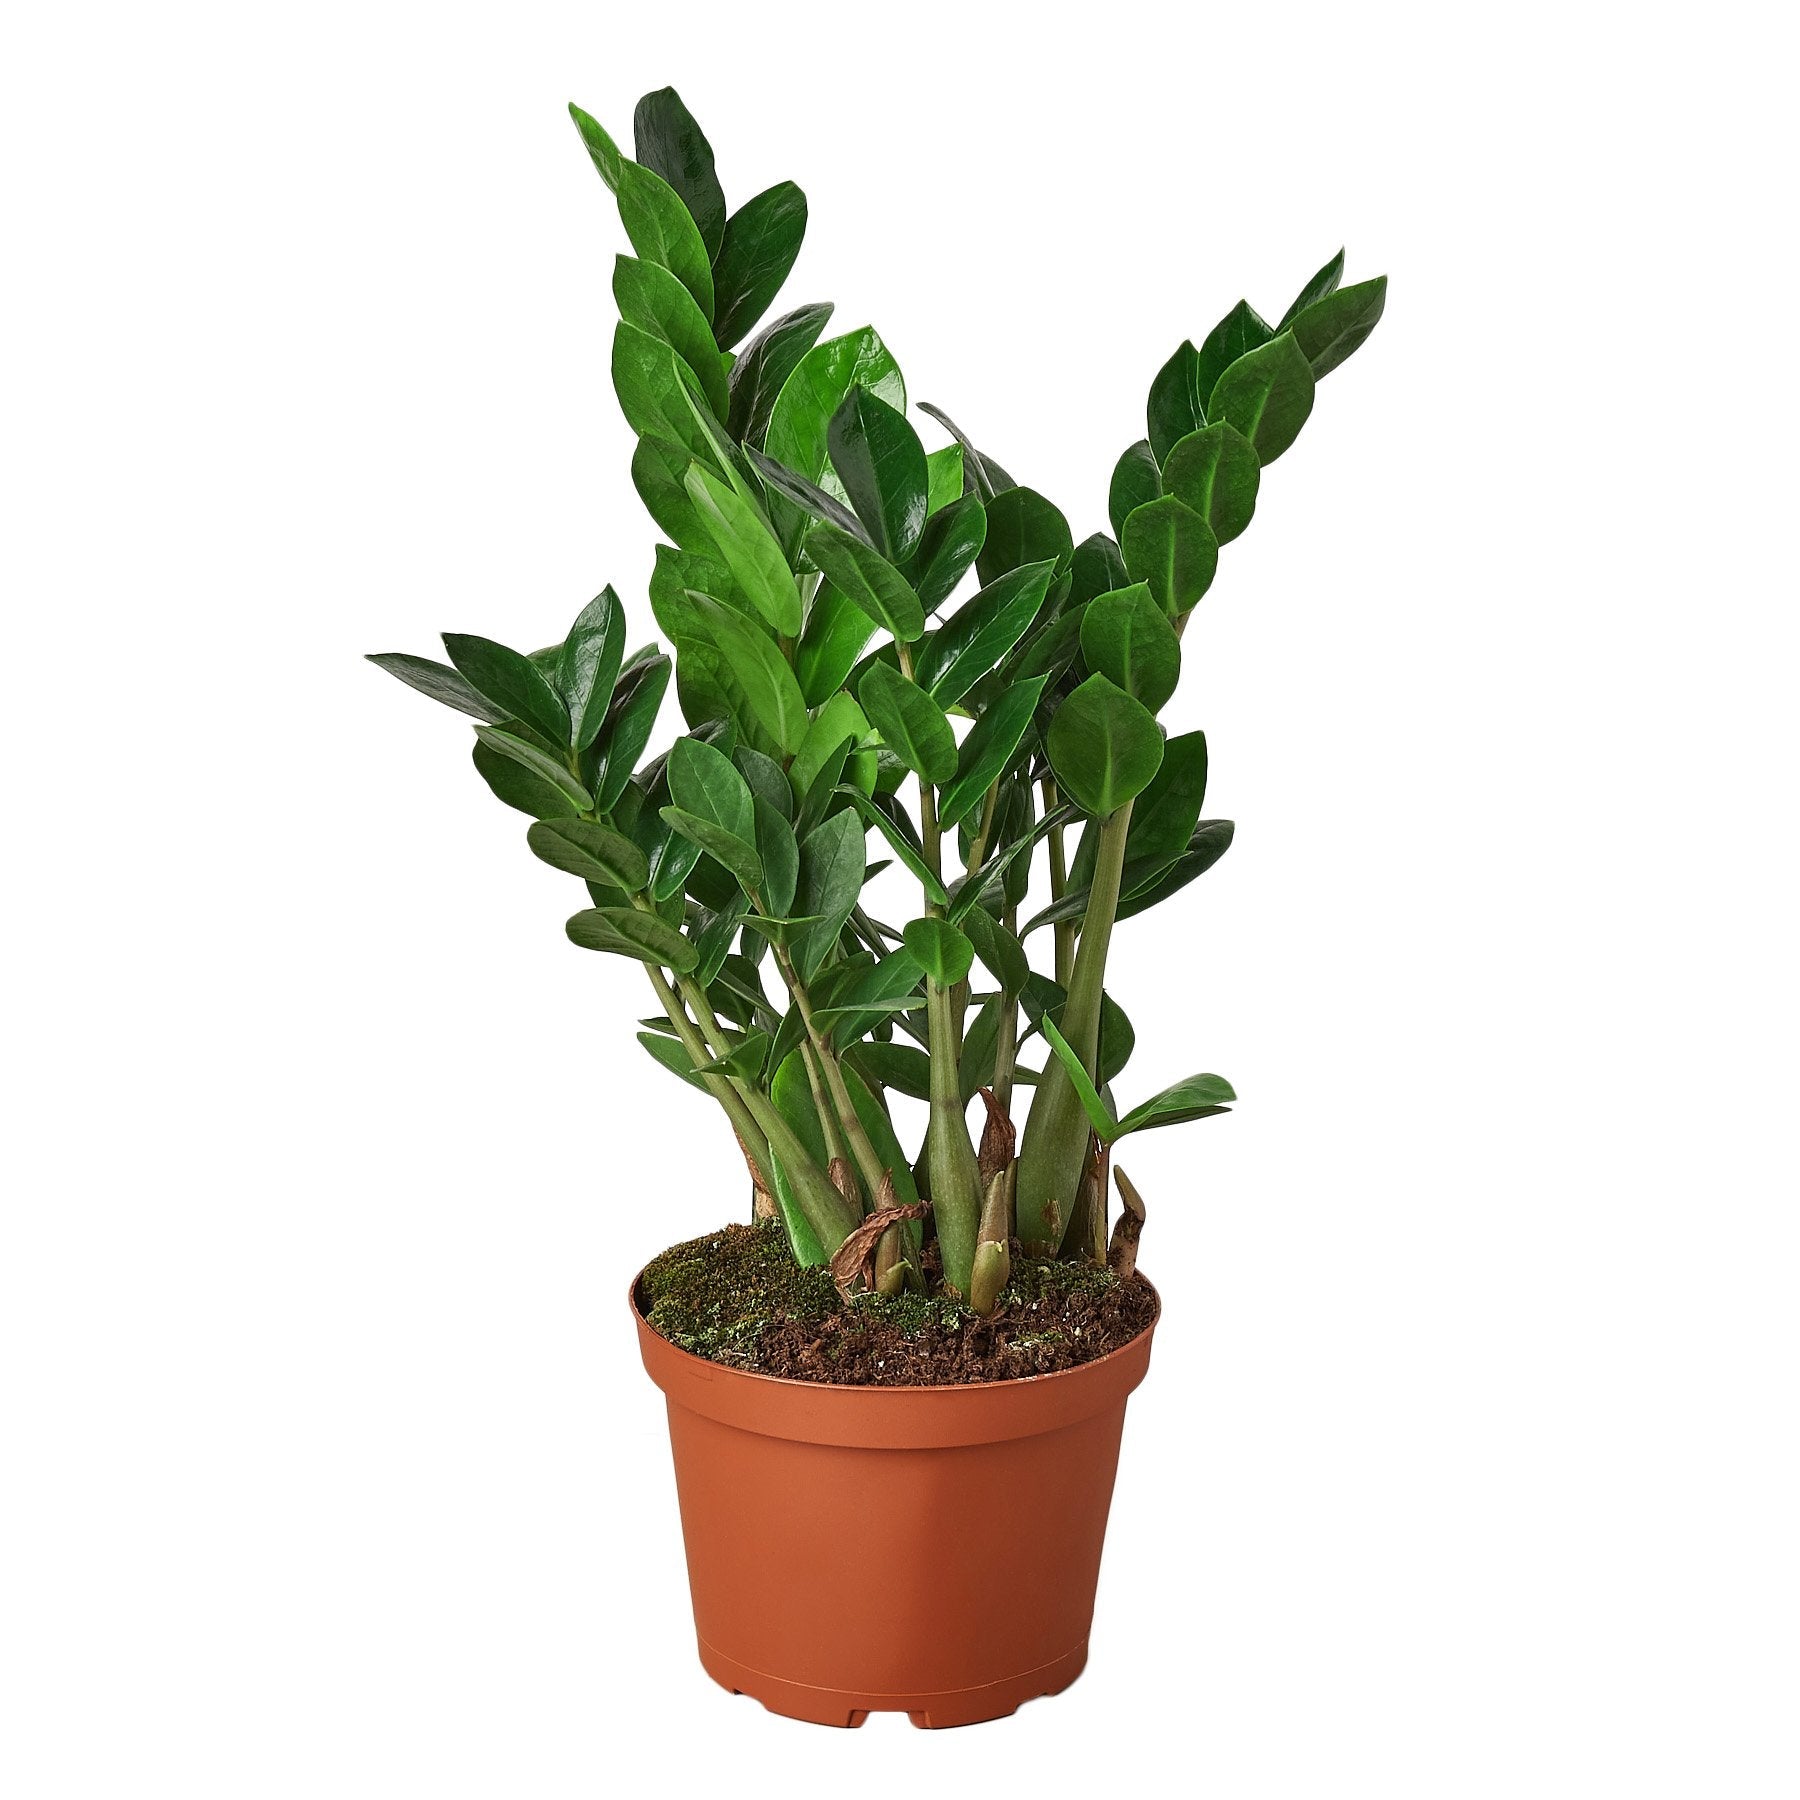 A plant in a brown pot on a white background, available at a nearby garden center.